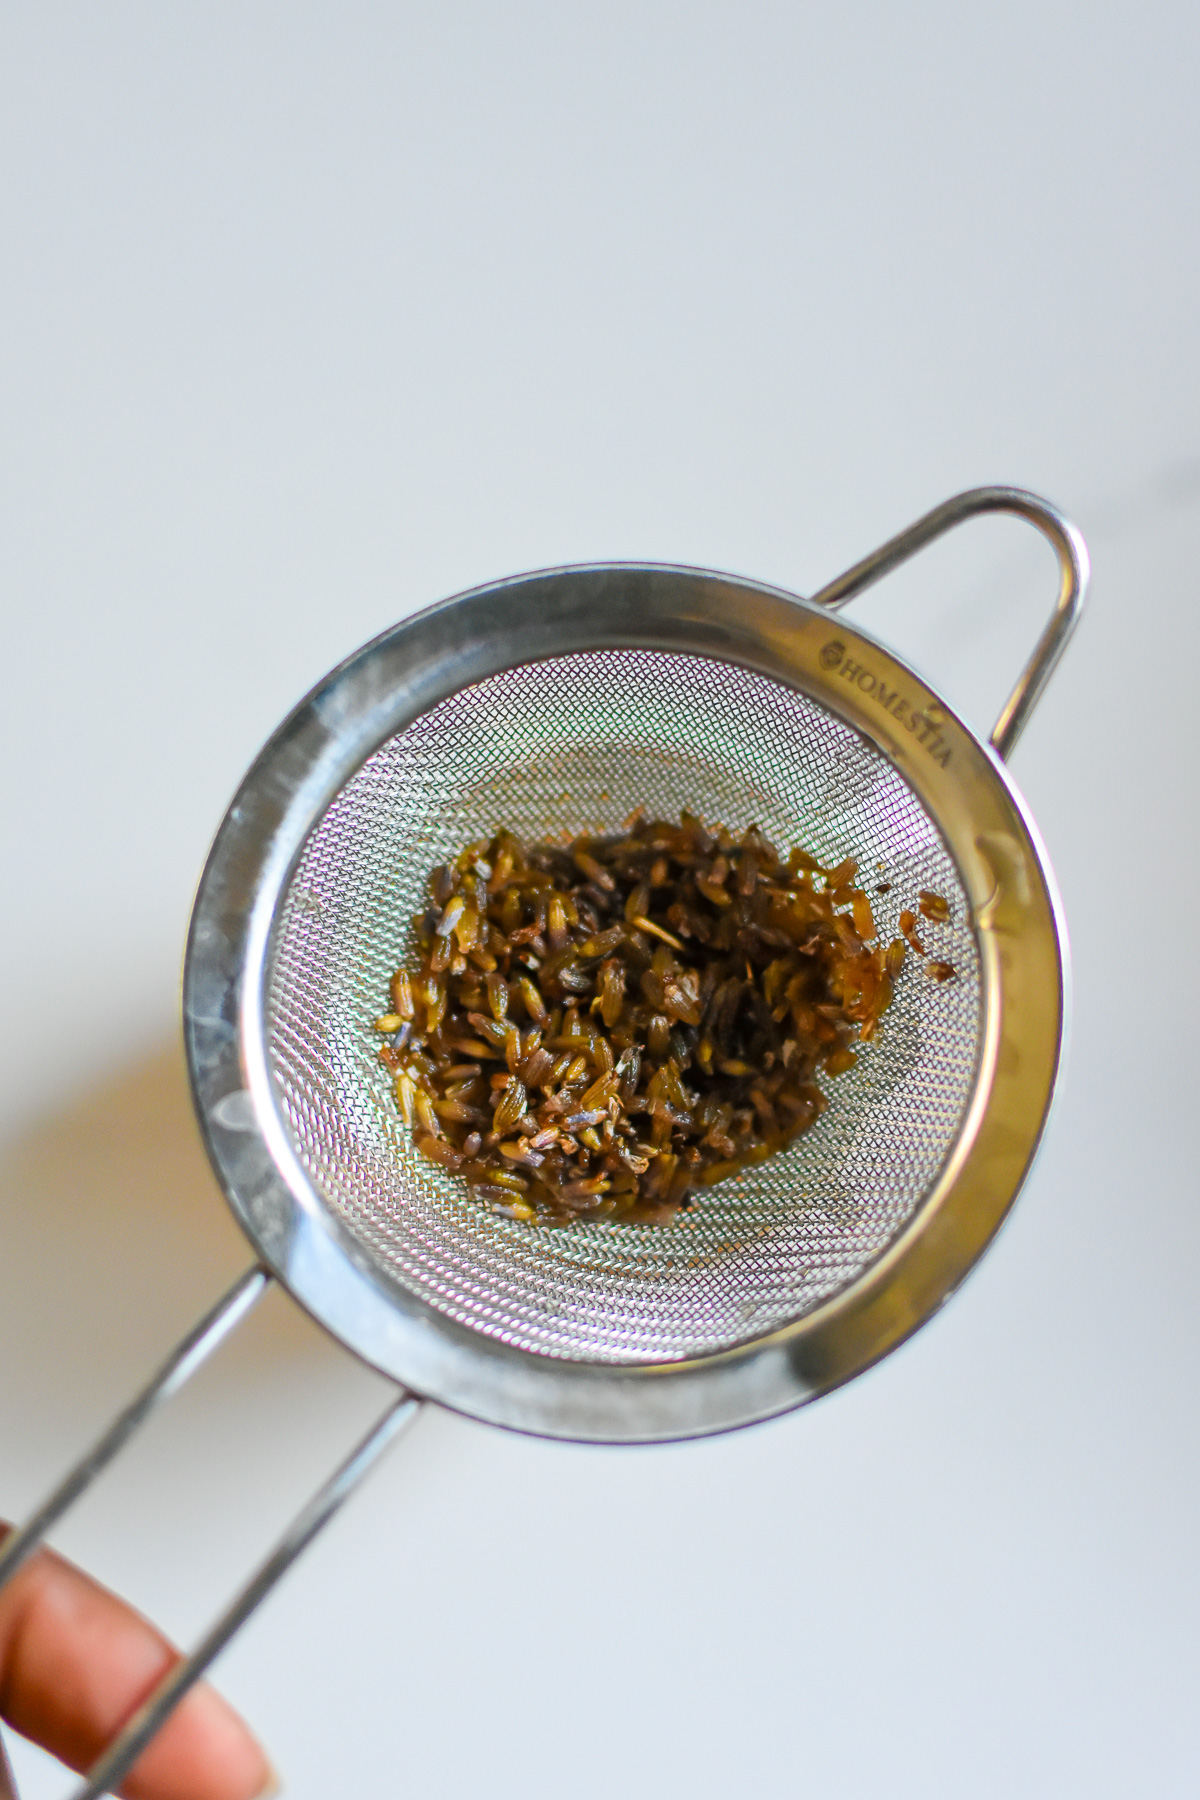 honey soaked lavender syrup in silver mesh strainer.